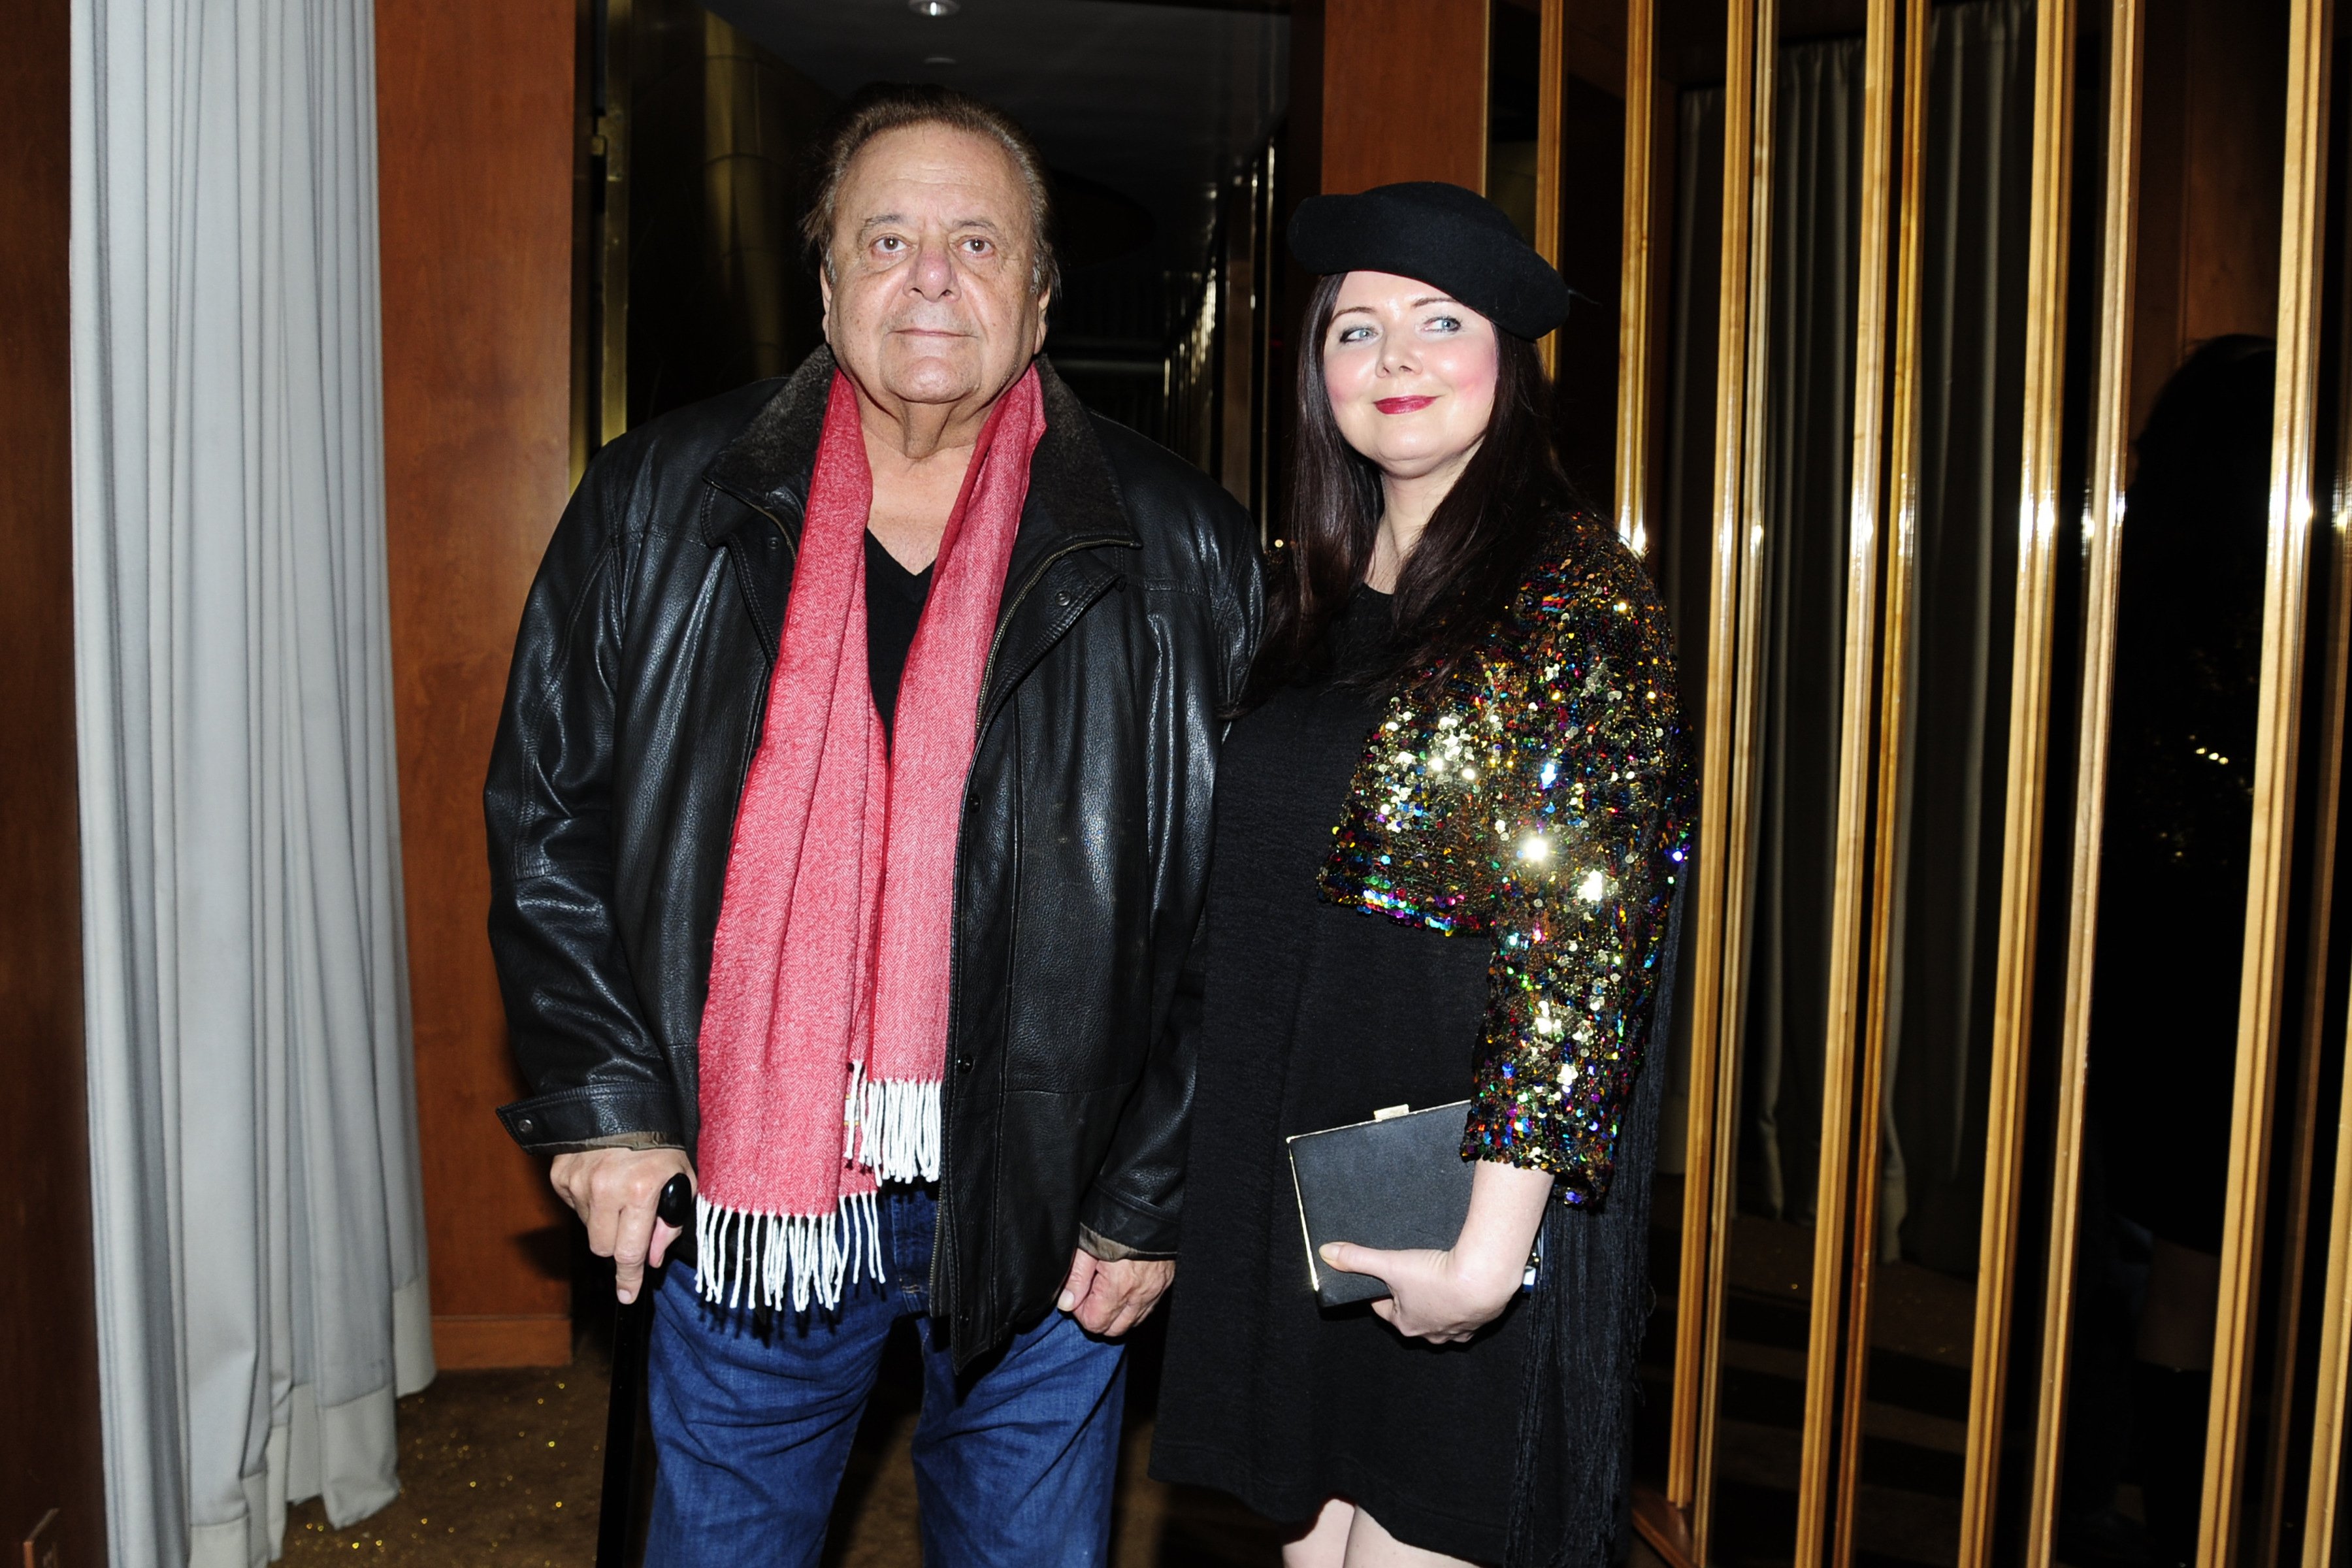 Paul Sorvino and Dee Dee Sorvino attend The Cinema Society With FIJI Water, Lindt Chocolate, Entertainment Weekly & People Host The After Party For Disney's "Mary Poppins Returns" at Top of The Standard Hotel on December 17, 2018 in New York City. | Source: Getty Images 